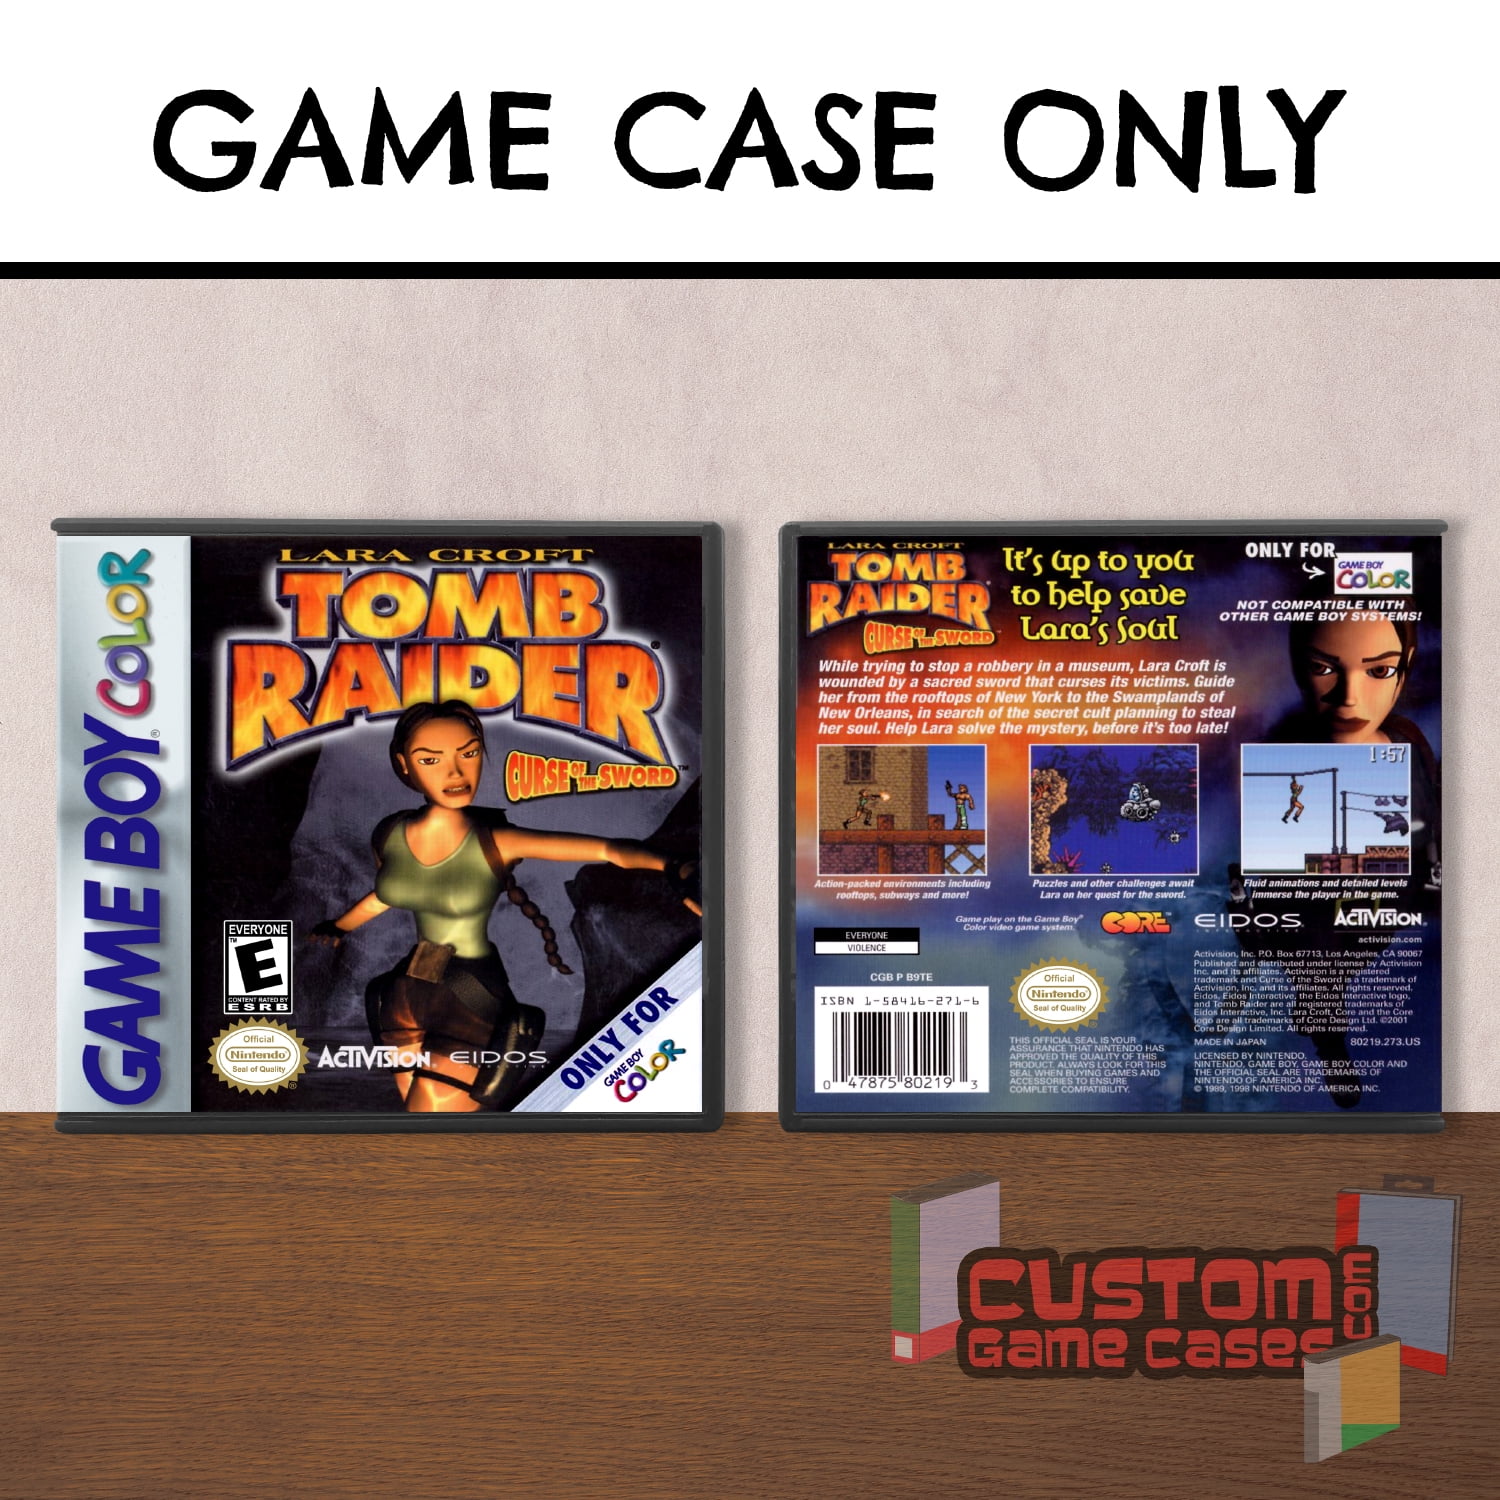 Tomb Raider: Curse of the Sword - (GBC) Game Boy Color - Game Case with  Cover